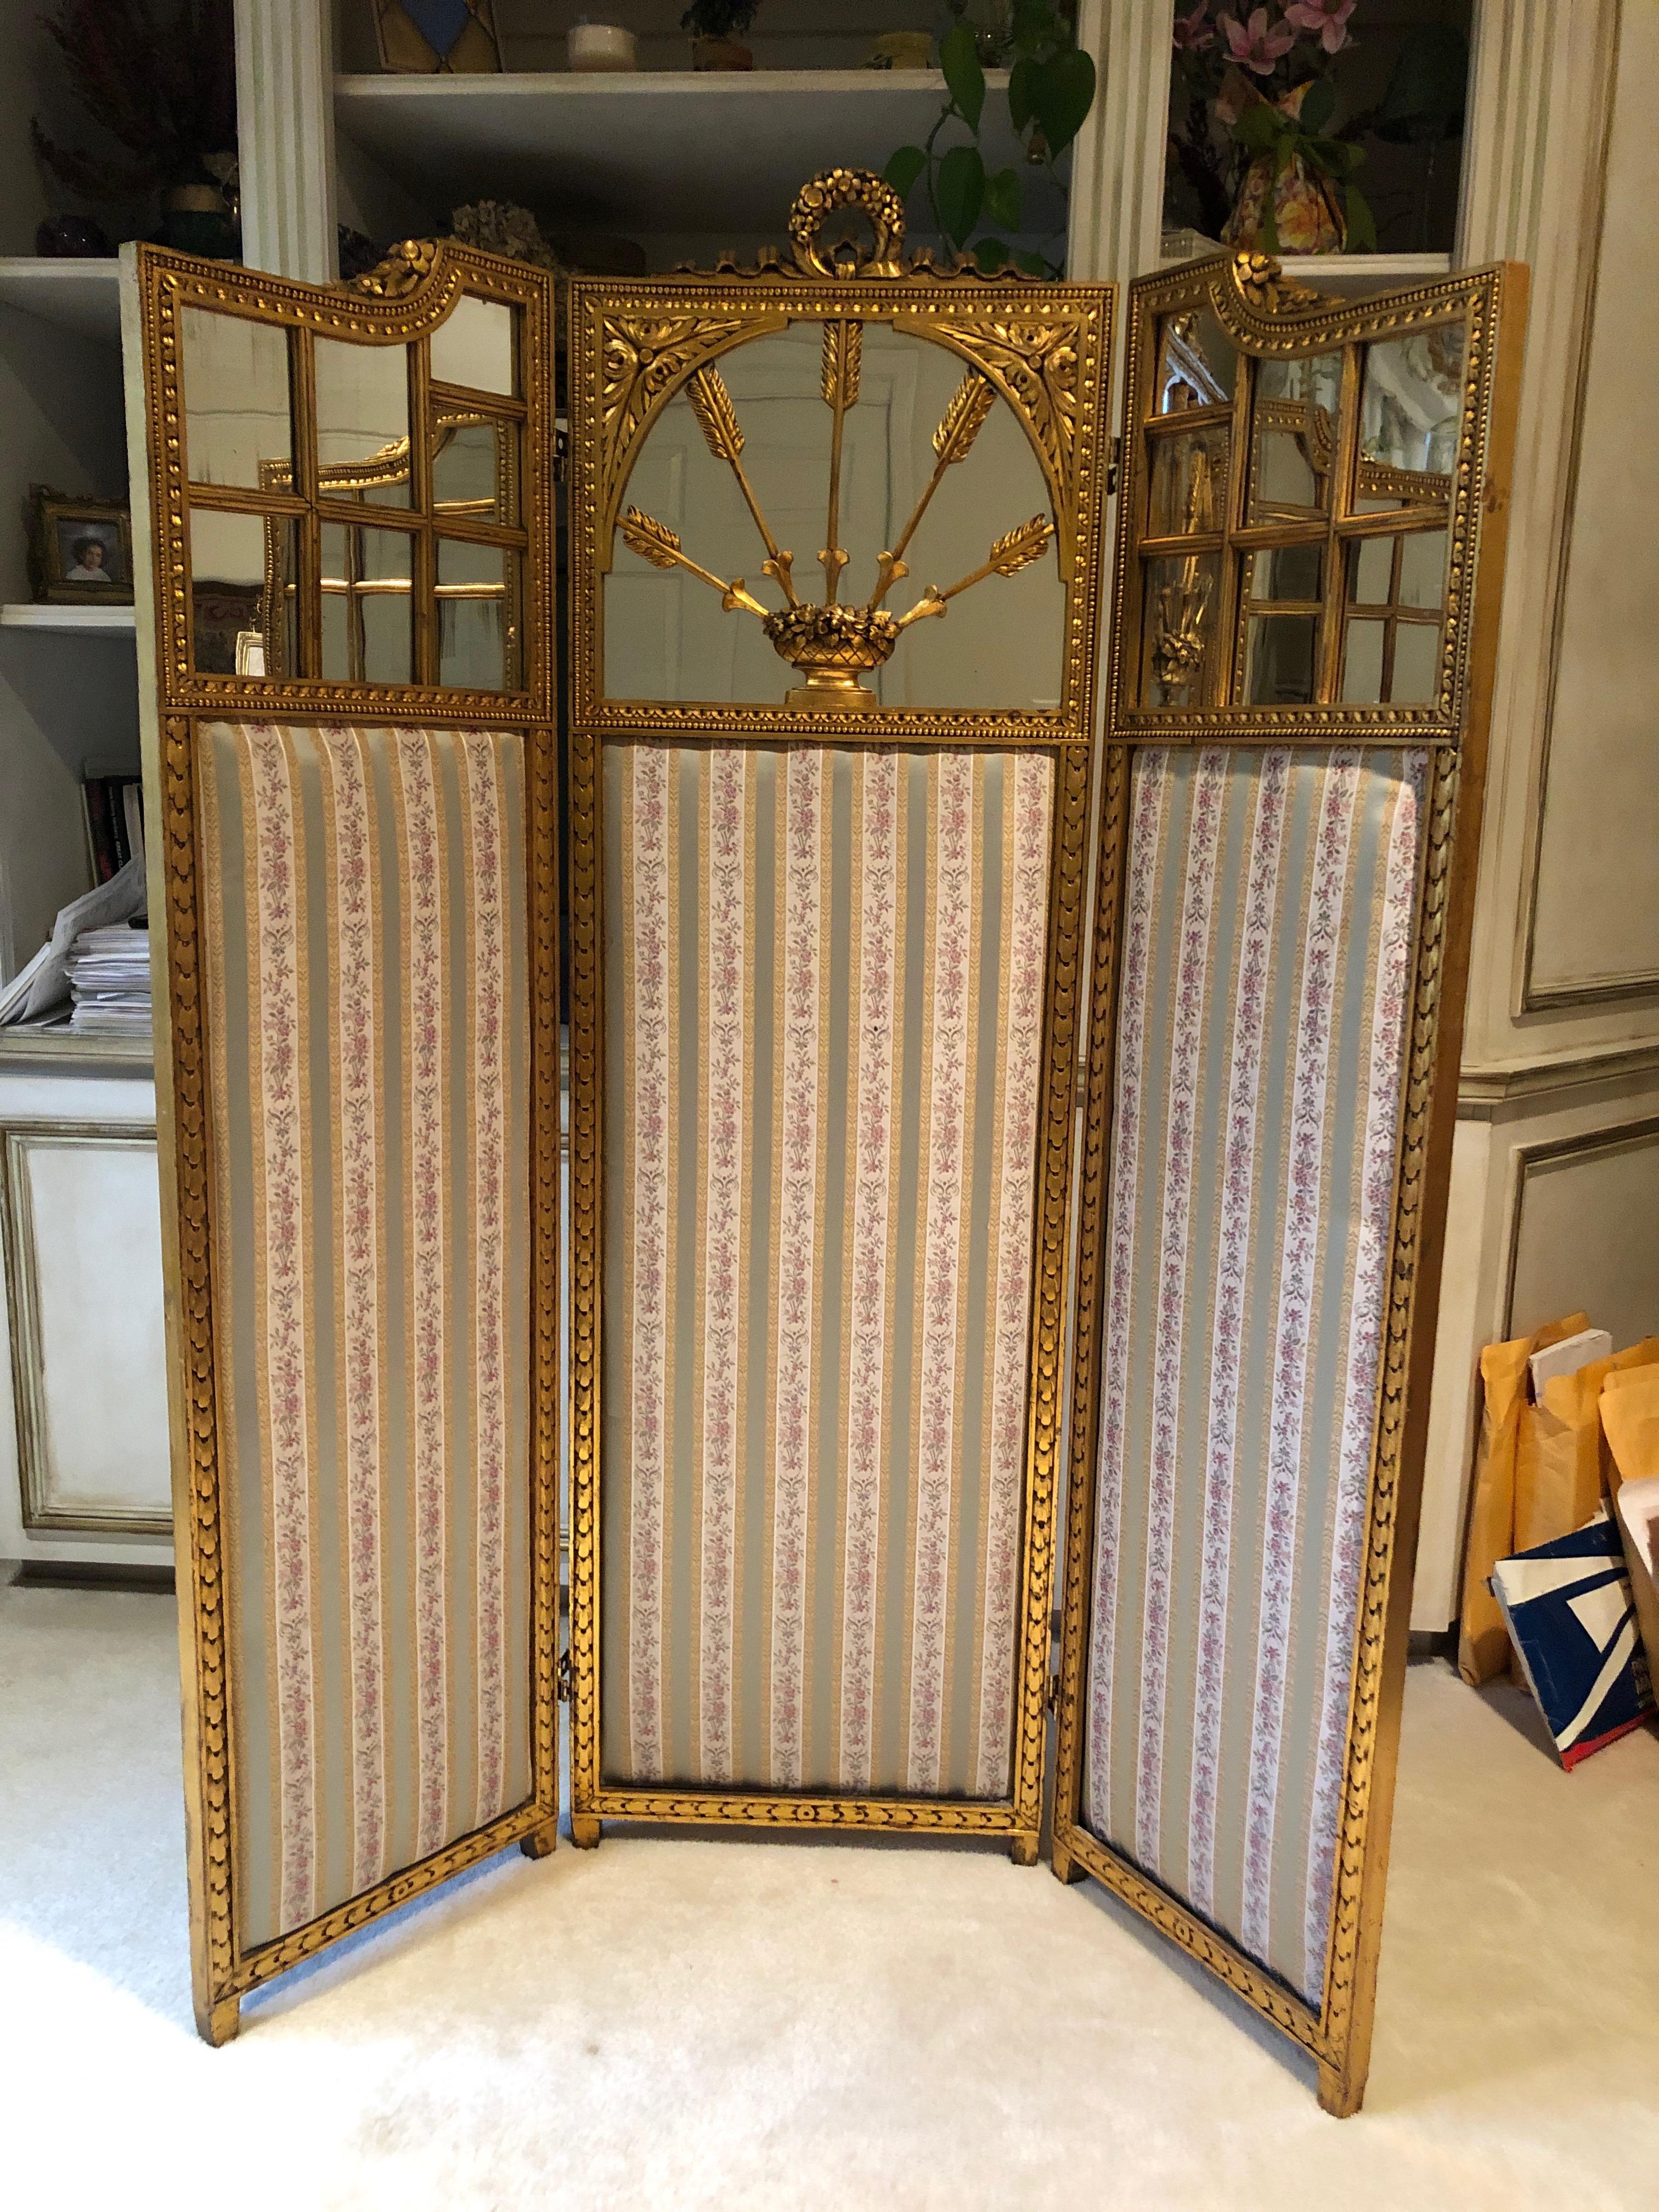 A sublimely elegant versatile antique French neoclassical folding screen having central panel with cresting of a garland with crimped ribbon ties over a square mirrored panel edged in running bead and acanthus banding, acanthus leaf spandrels and